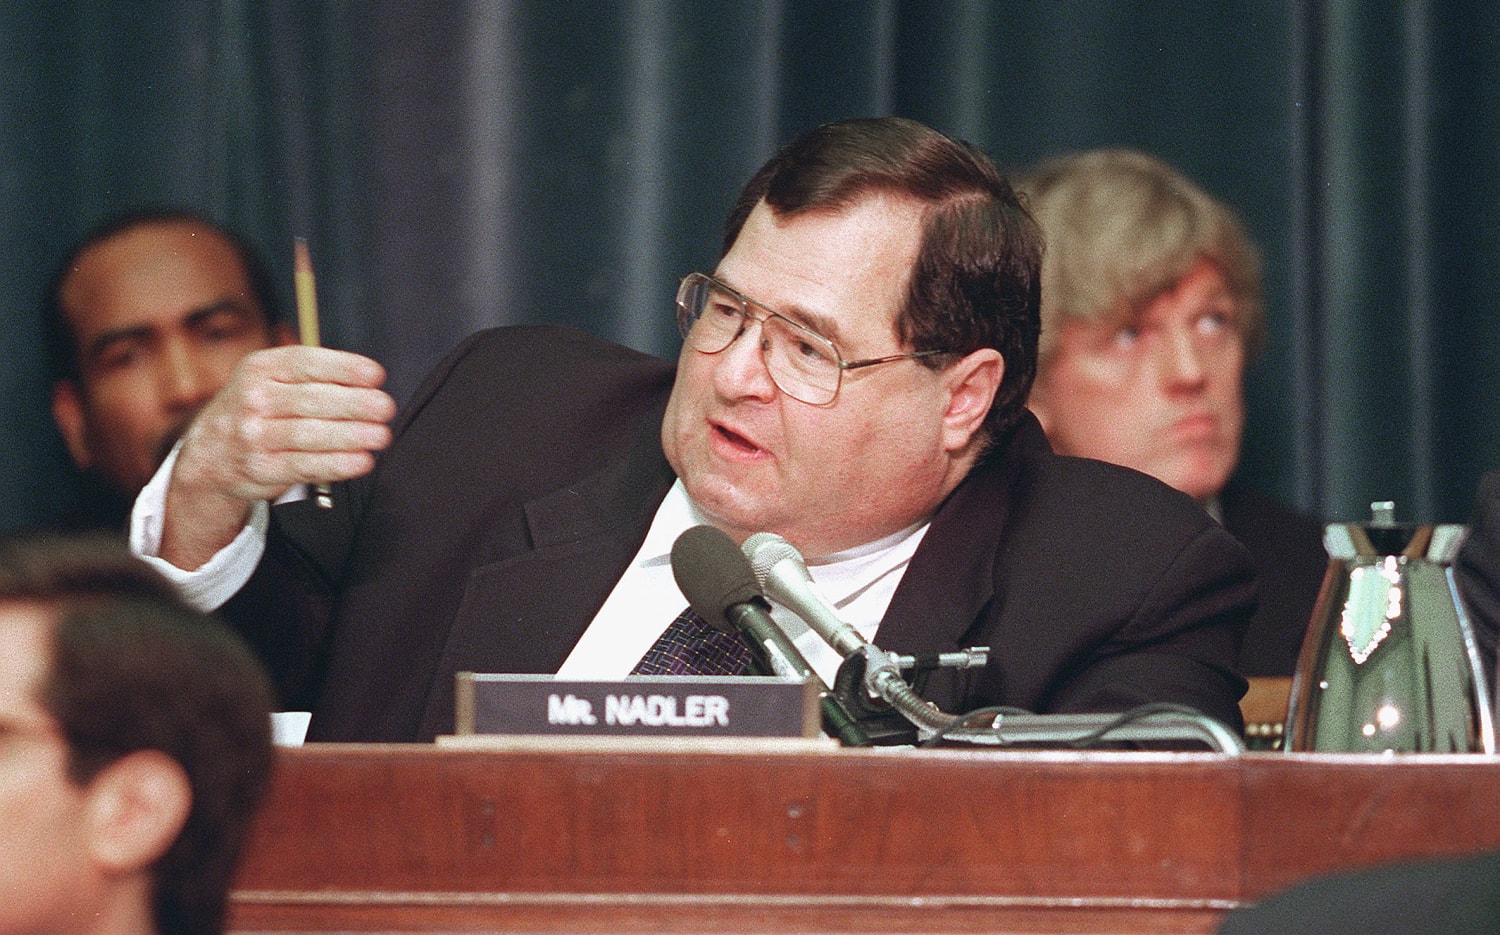 Flashback: What Nadler said about impeaching a president in 1998